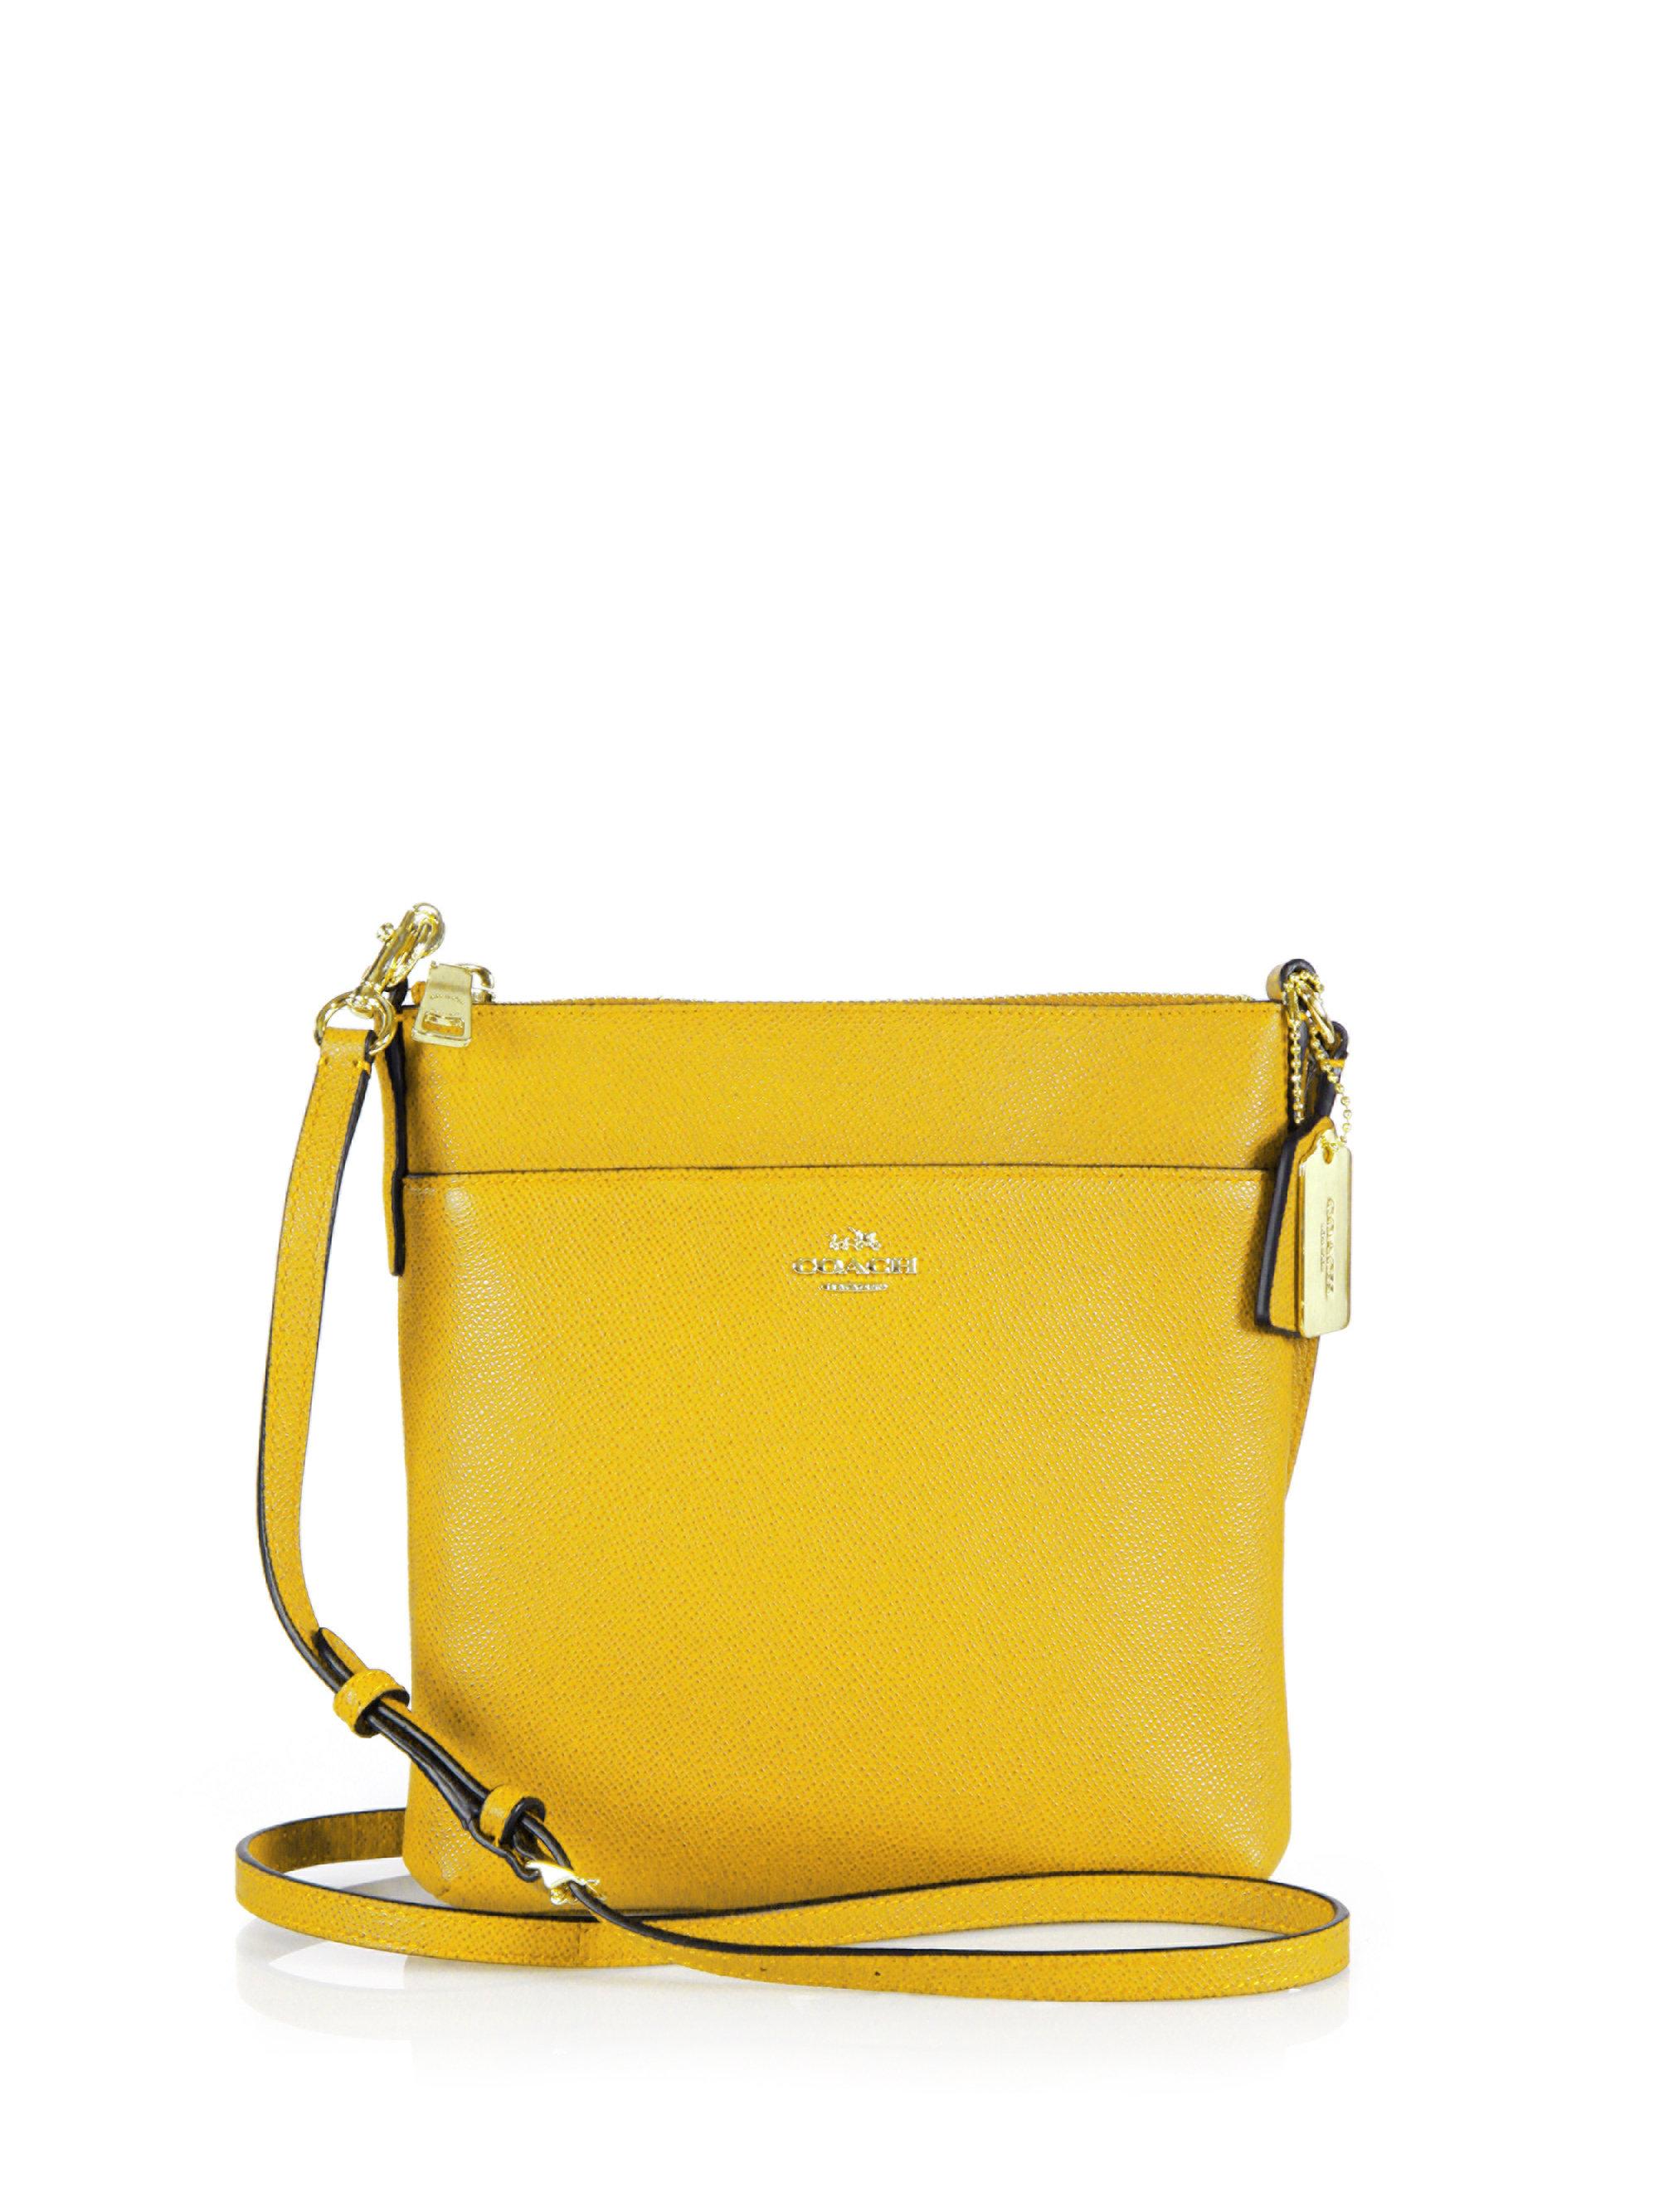 COACH Courier Textured Leather Crossbody Bag in Yellow | Lyst